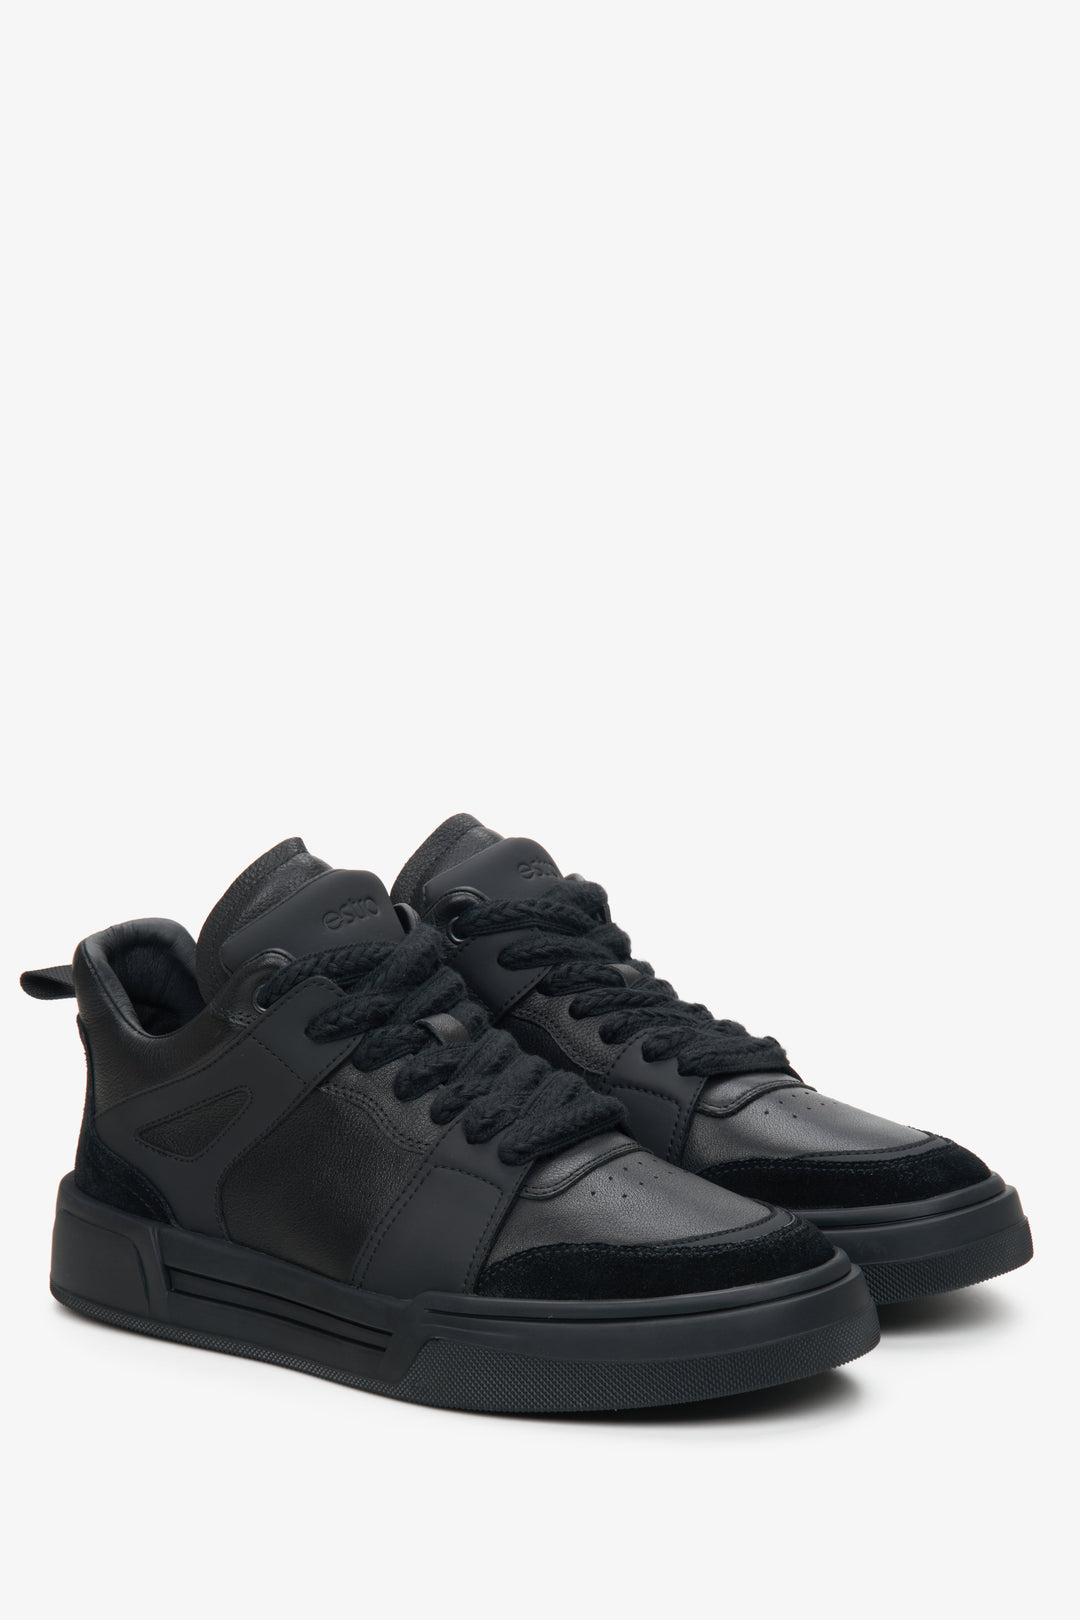 Men's black high-top sneakers by Estro made of genuine leather and suede.